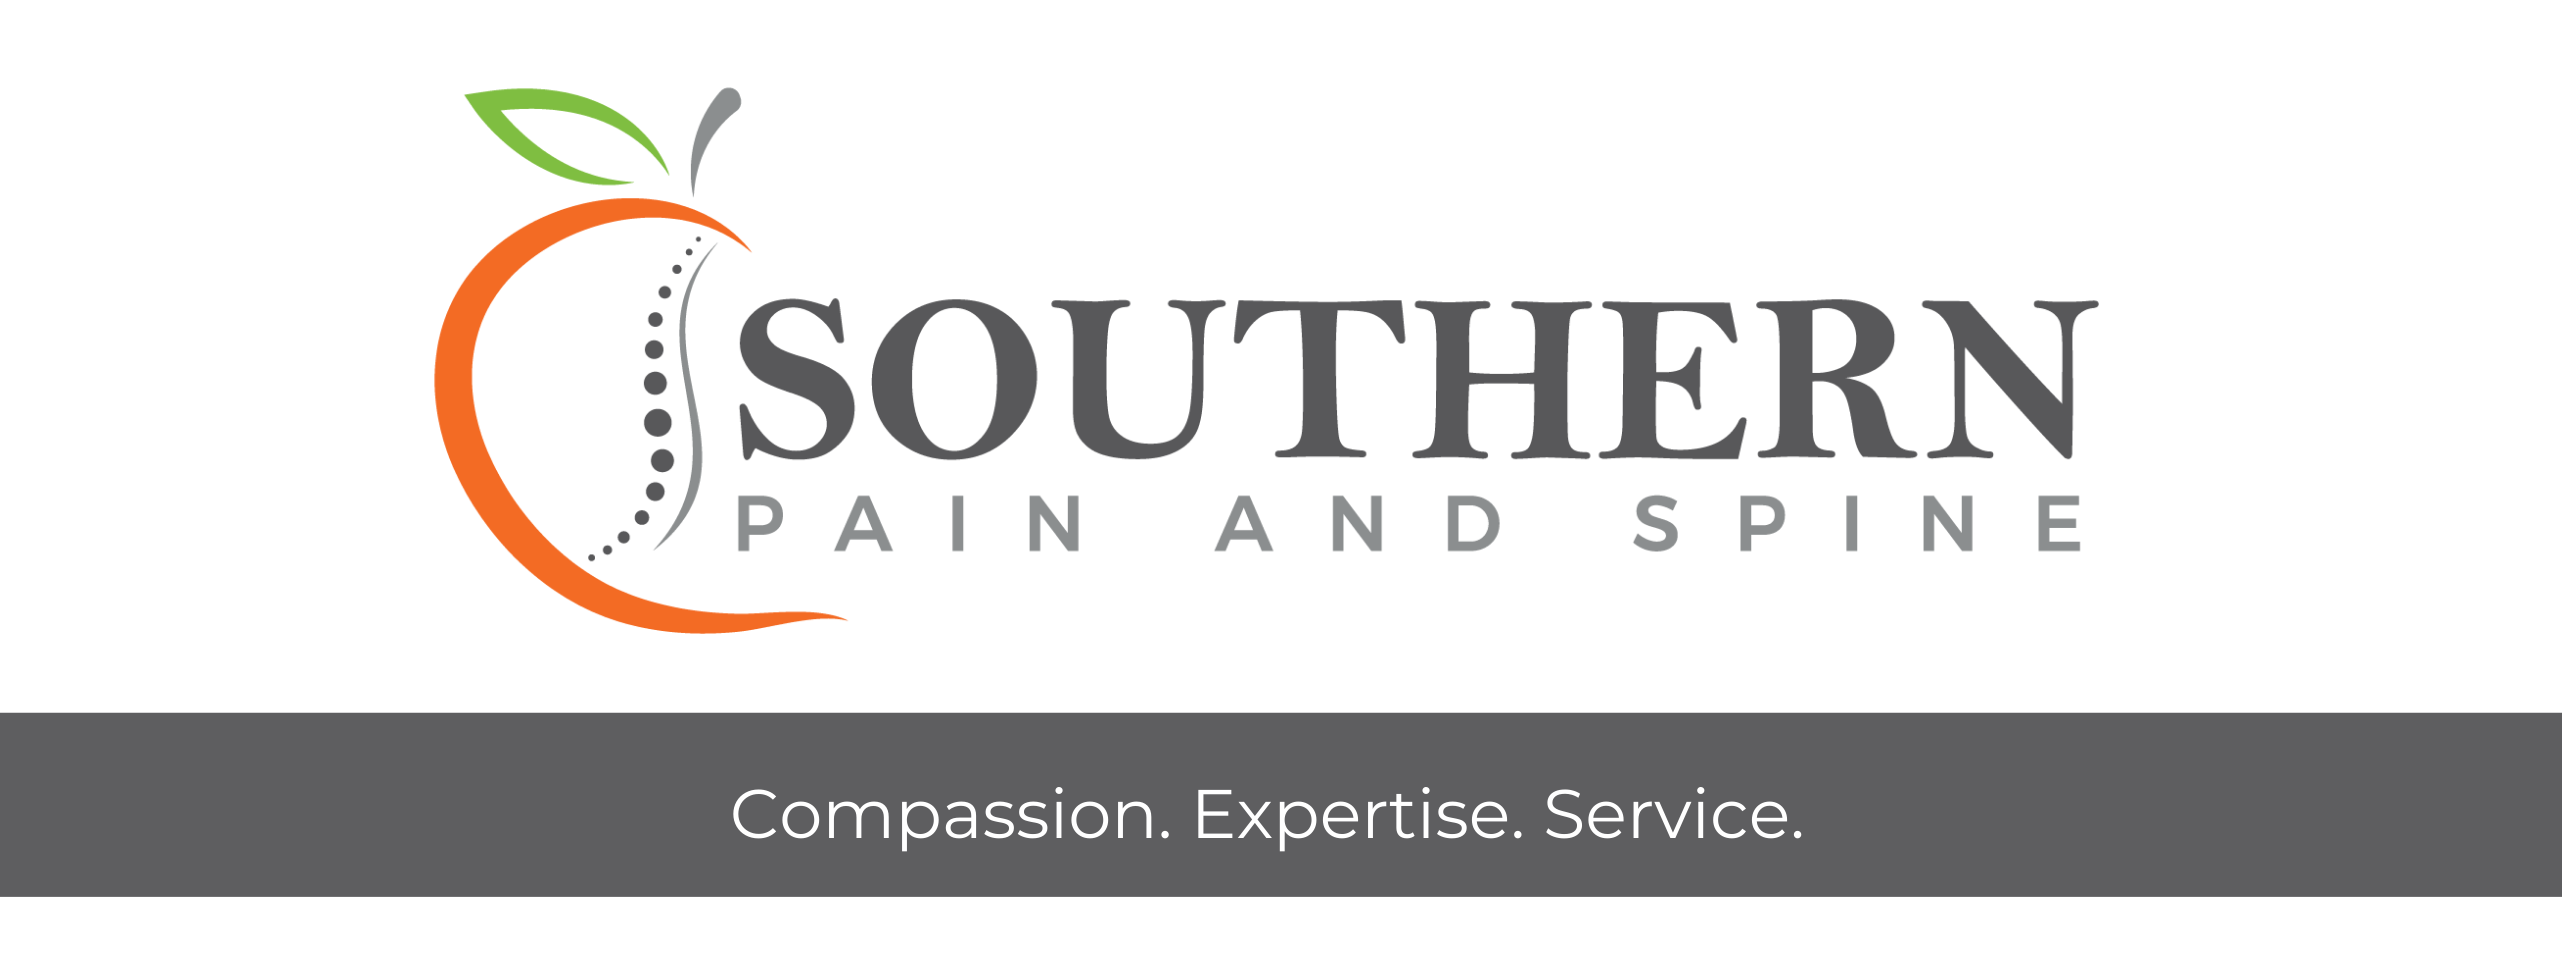 Southern Pain and Spine Associates